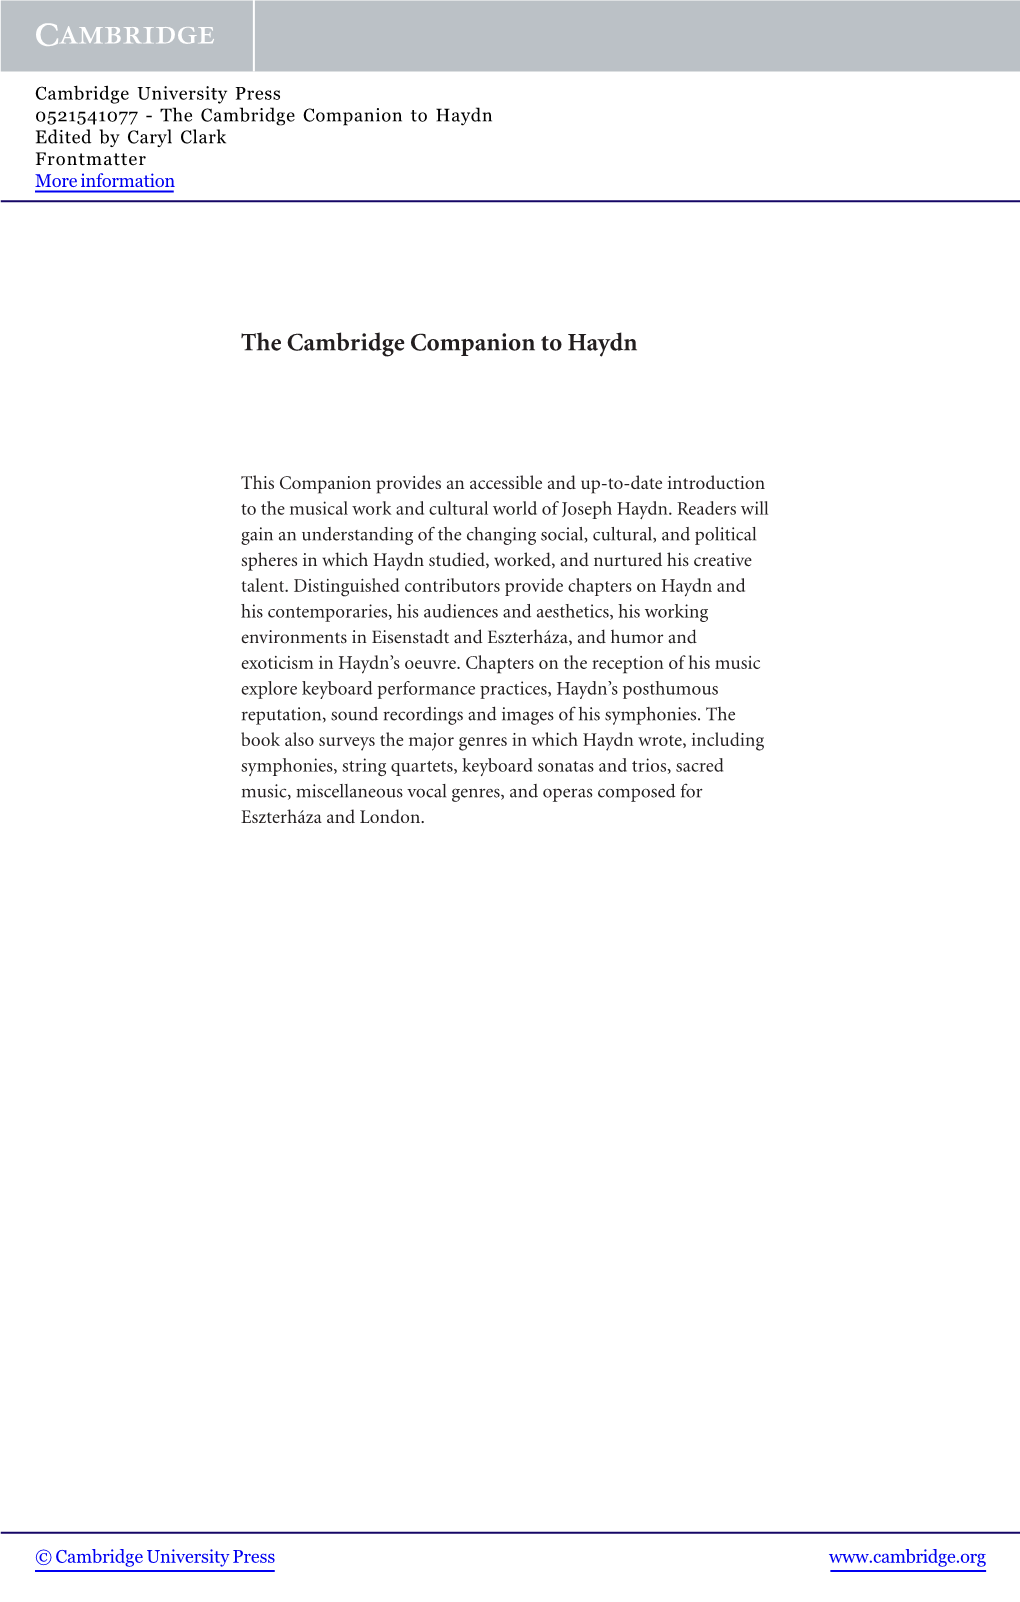 The Cambridge Companion to Haydn Edited by Caryl Clark Frontmatter More Information